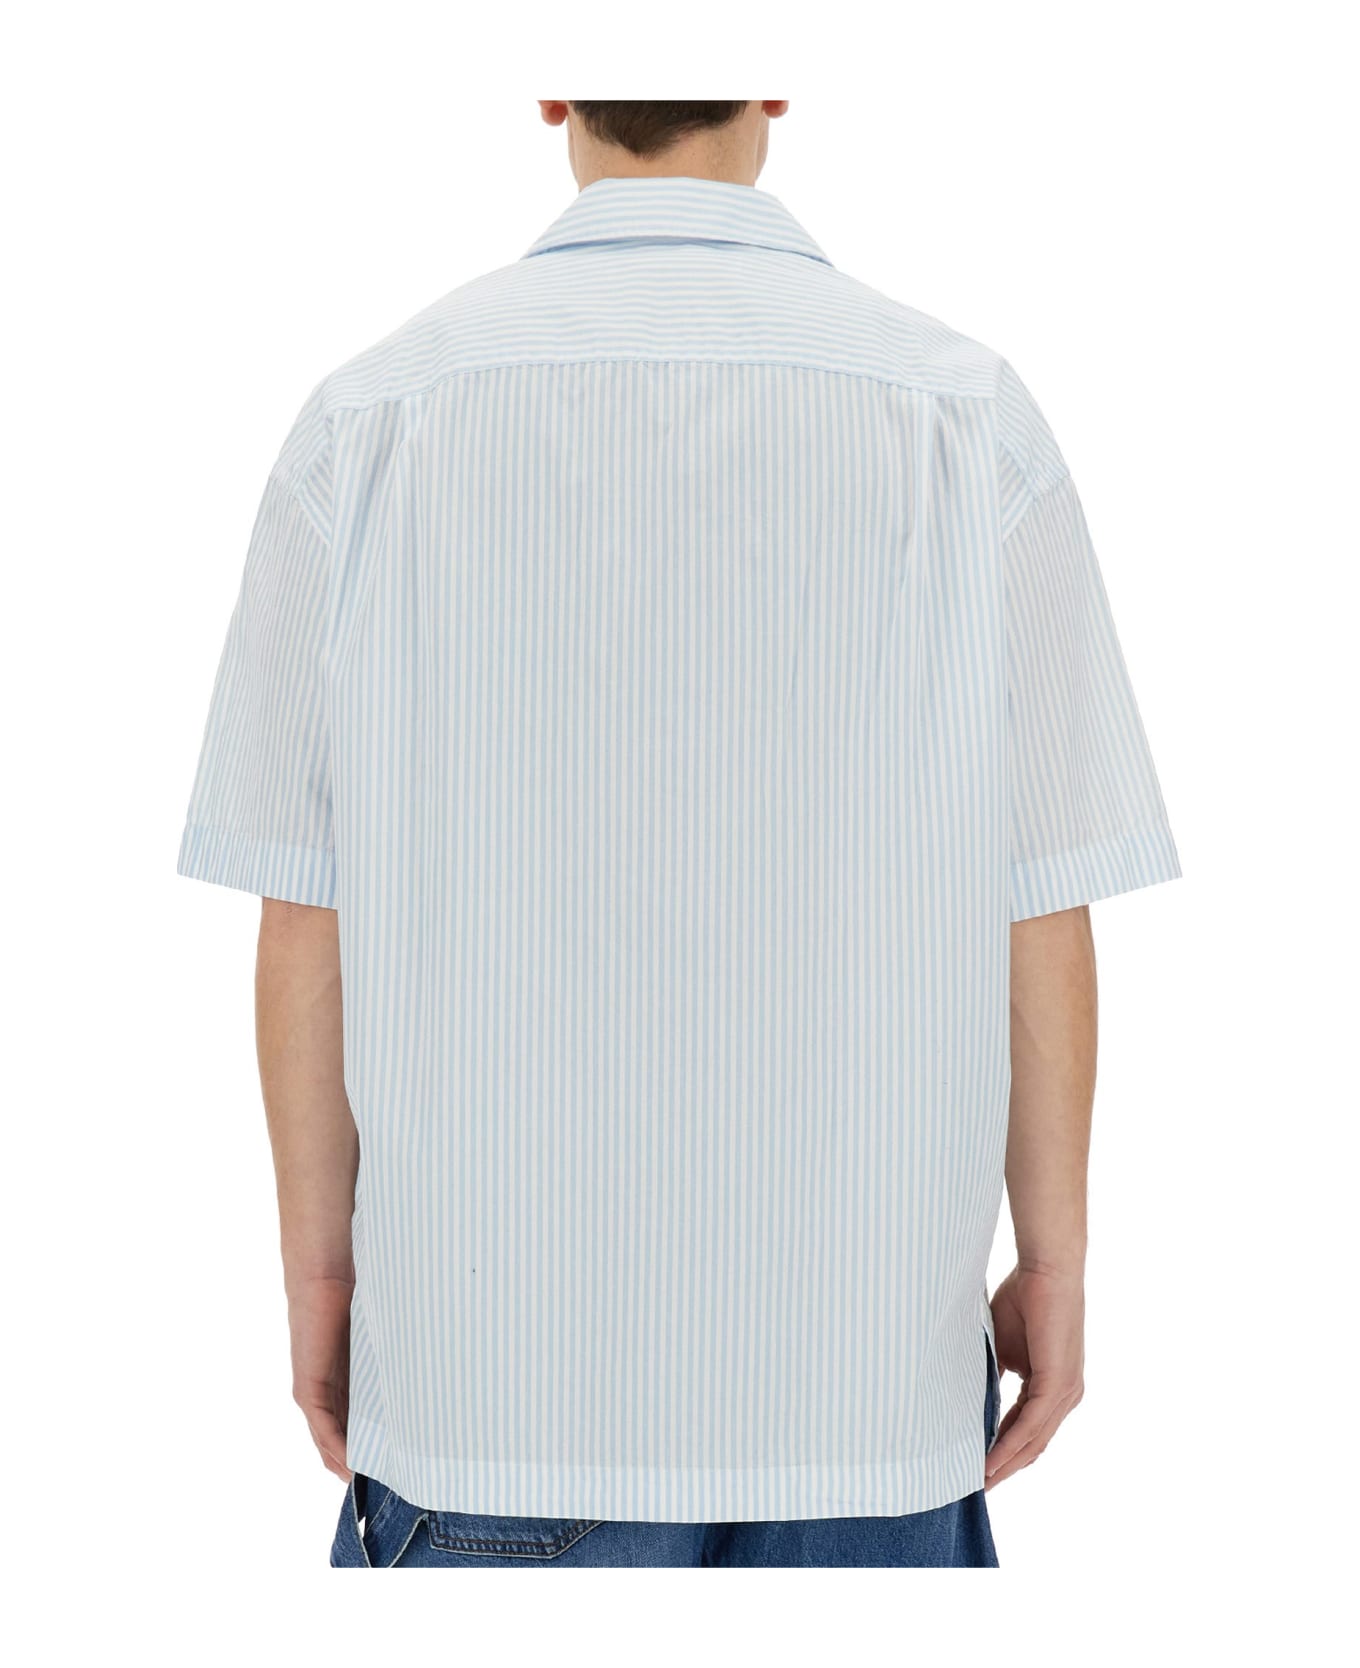 J.W. Anderson Boxy Fit Shirt